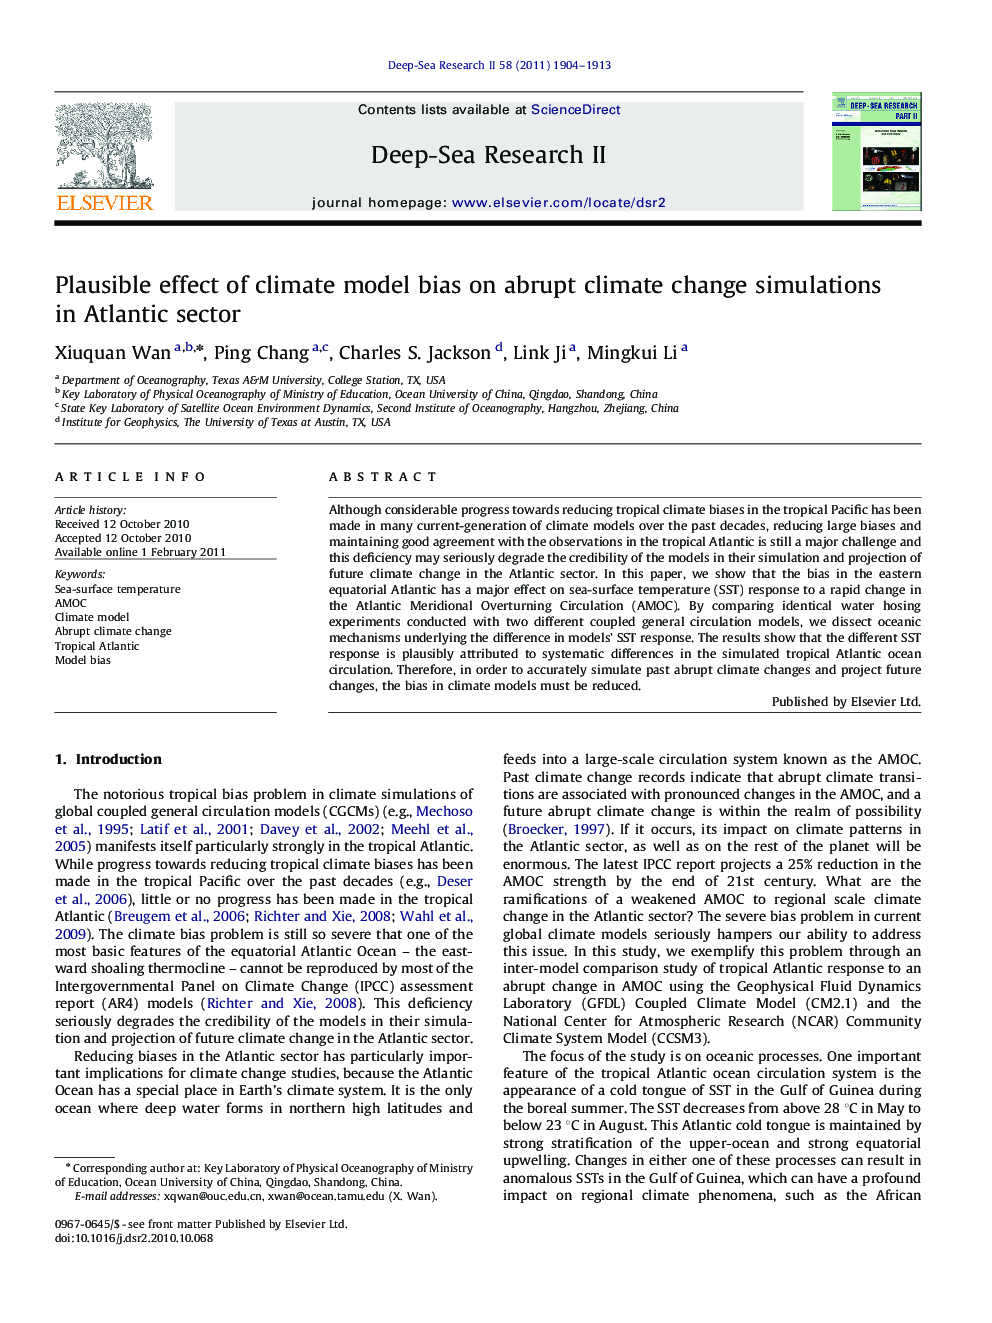 Plausible effect of climate model bias on abrupt climate change simulations in Atlantic sector